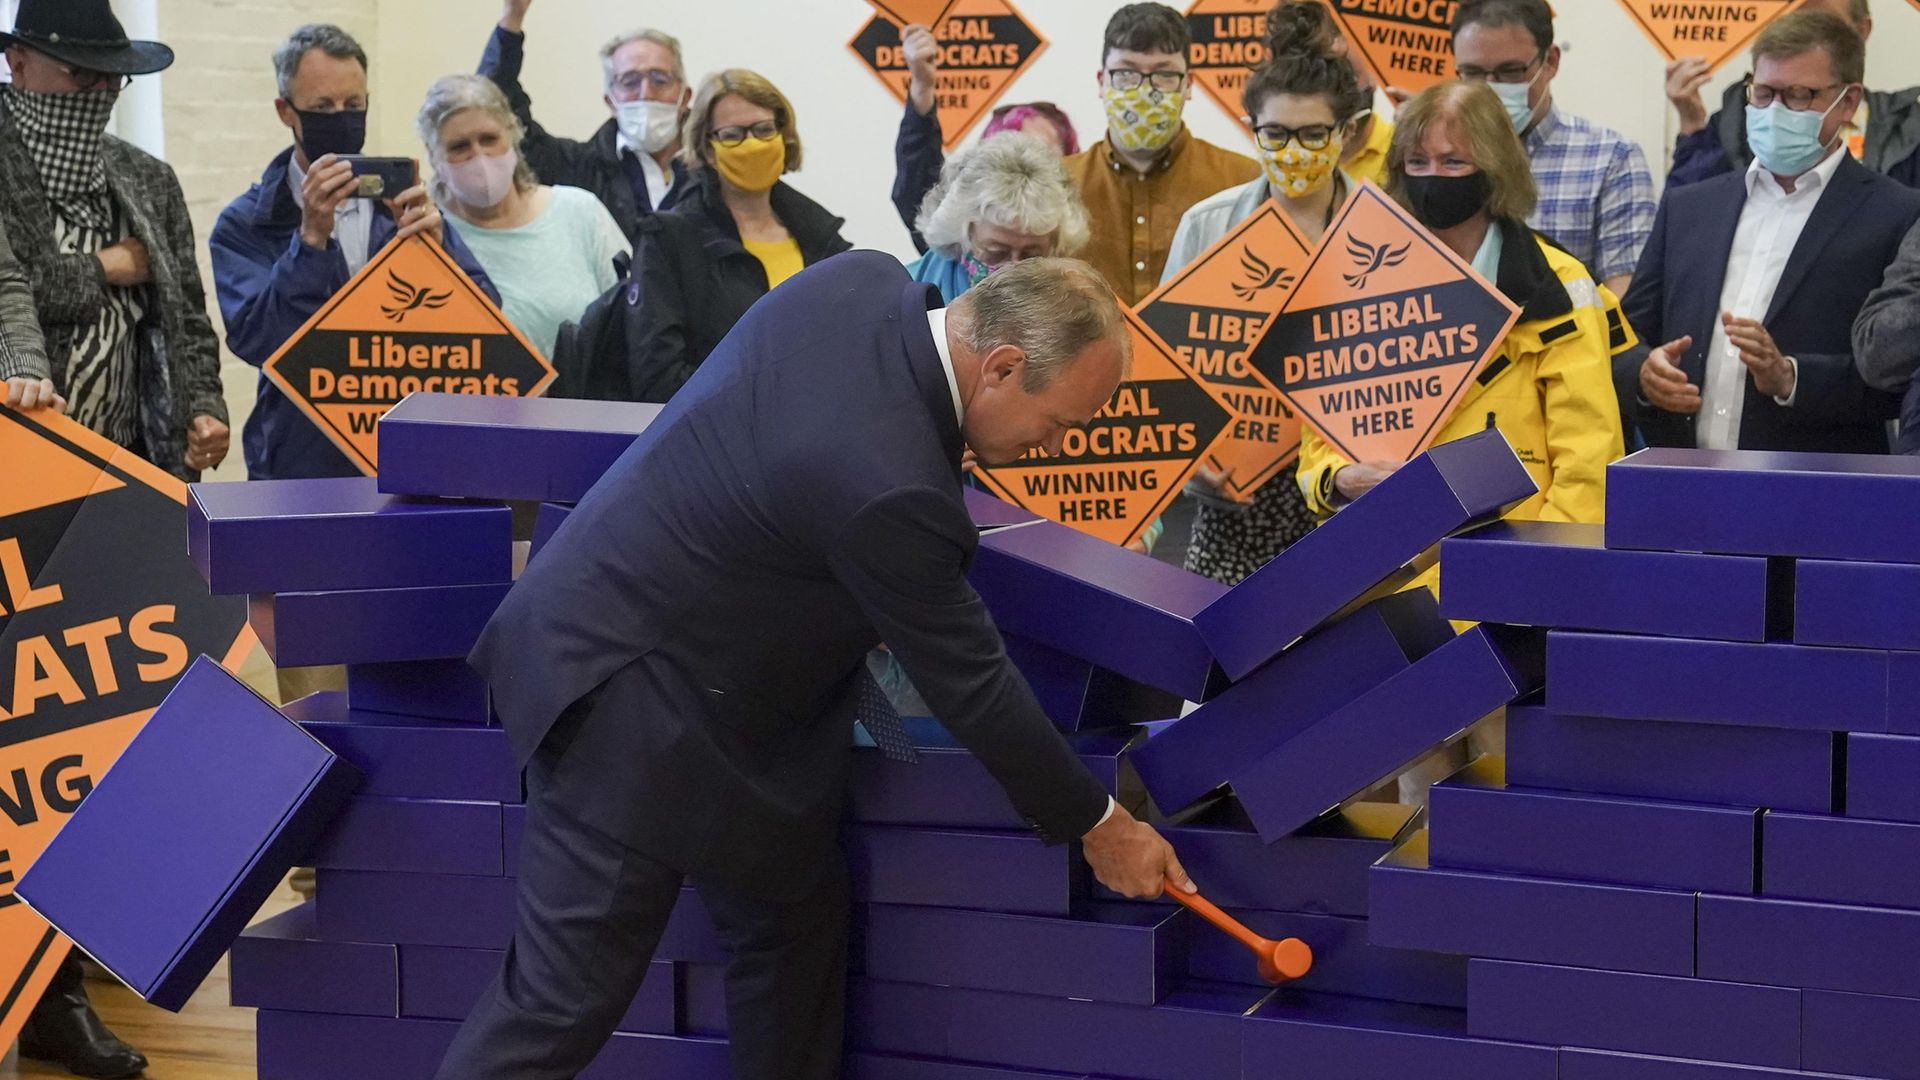 Liberal Democrat leader Ed Davey during a victory rally at Chesham Youth Centre in Chesham, Buckinghamshire, after Sarah Green won the Chesham and Amersham by-election - Credit: PA